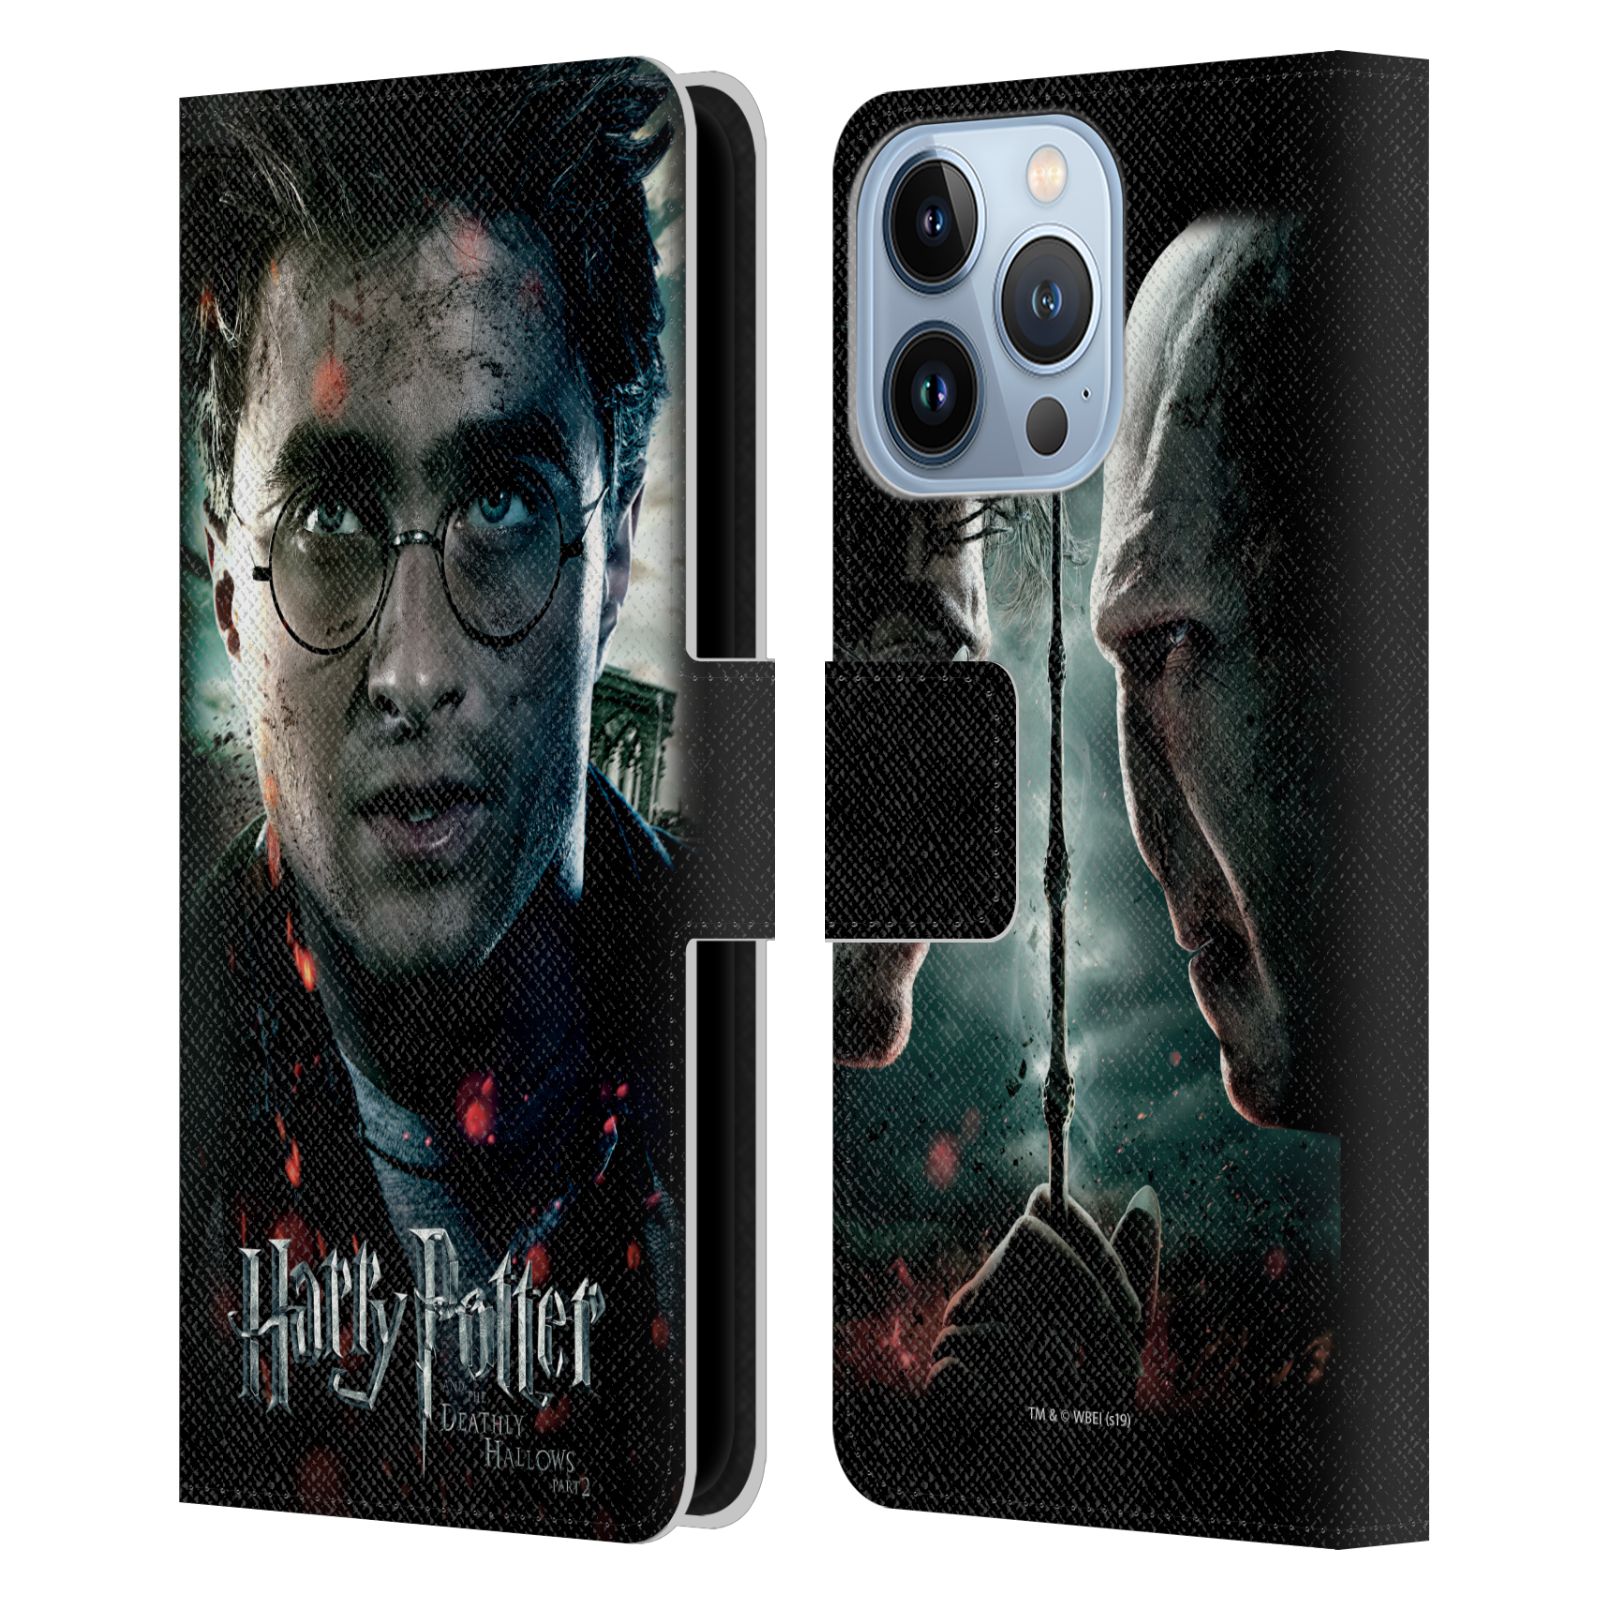 Pouzdro HEAD CASE na mobil Apple Iphone 13 PRO - Harry Potter a Voldemort